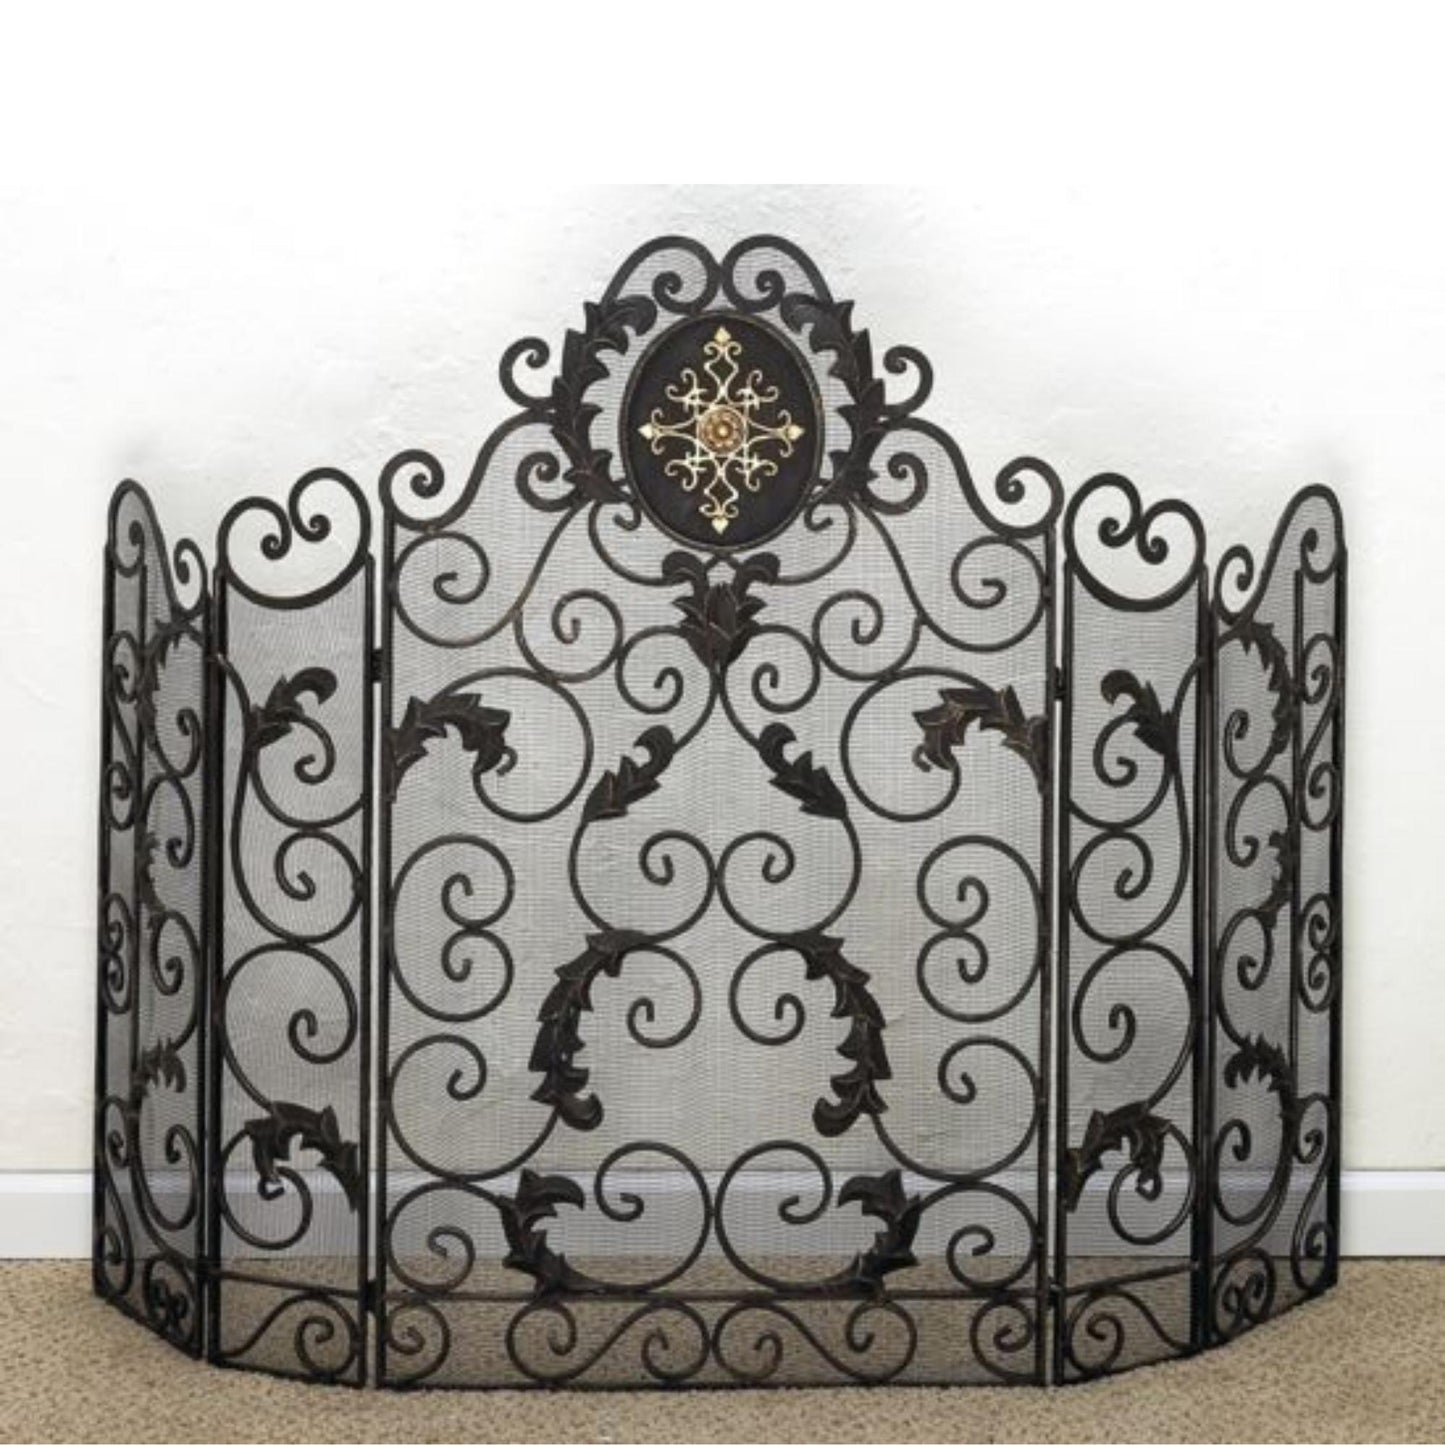 Monogrammed Iron Fire Screen - Five Panel Fireplace Screen with Mesh Backing | INSIDE OUT | InsideOutCatalog.com